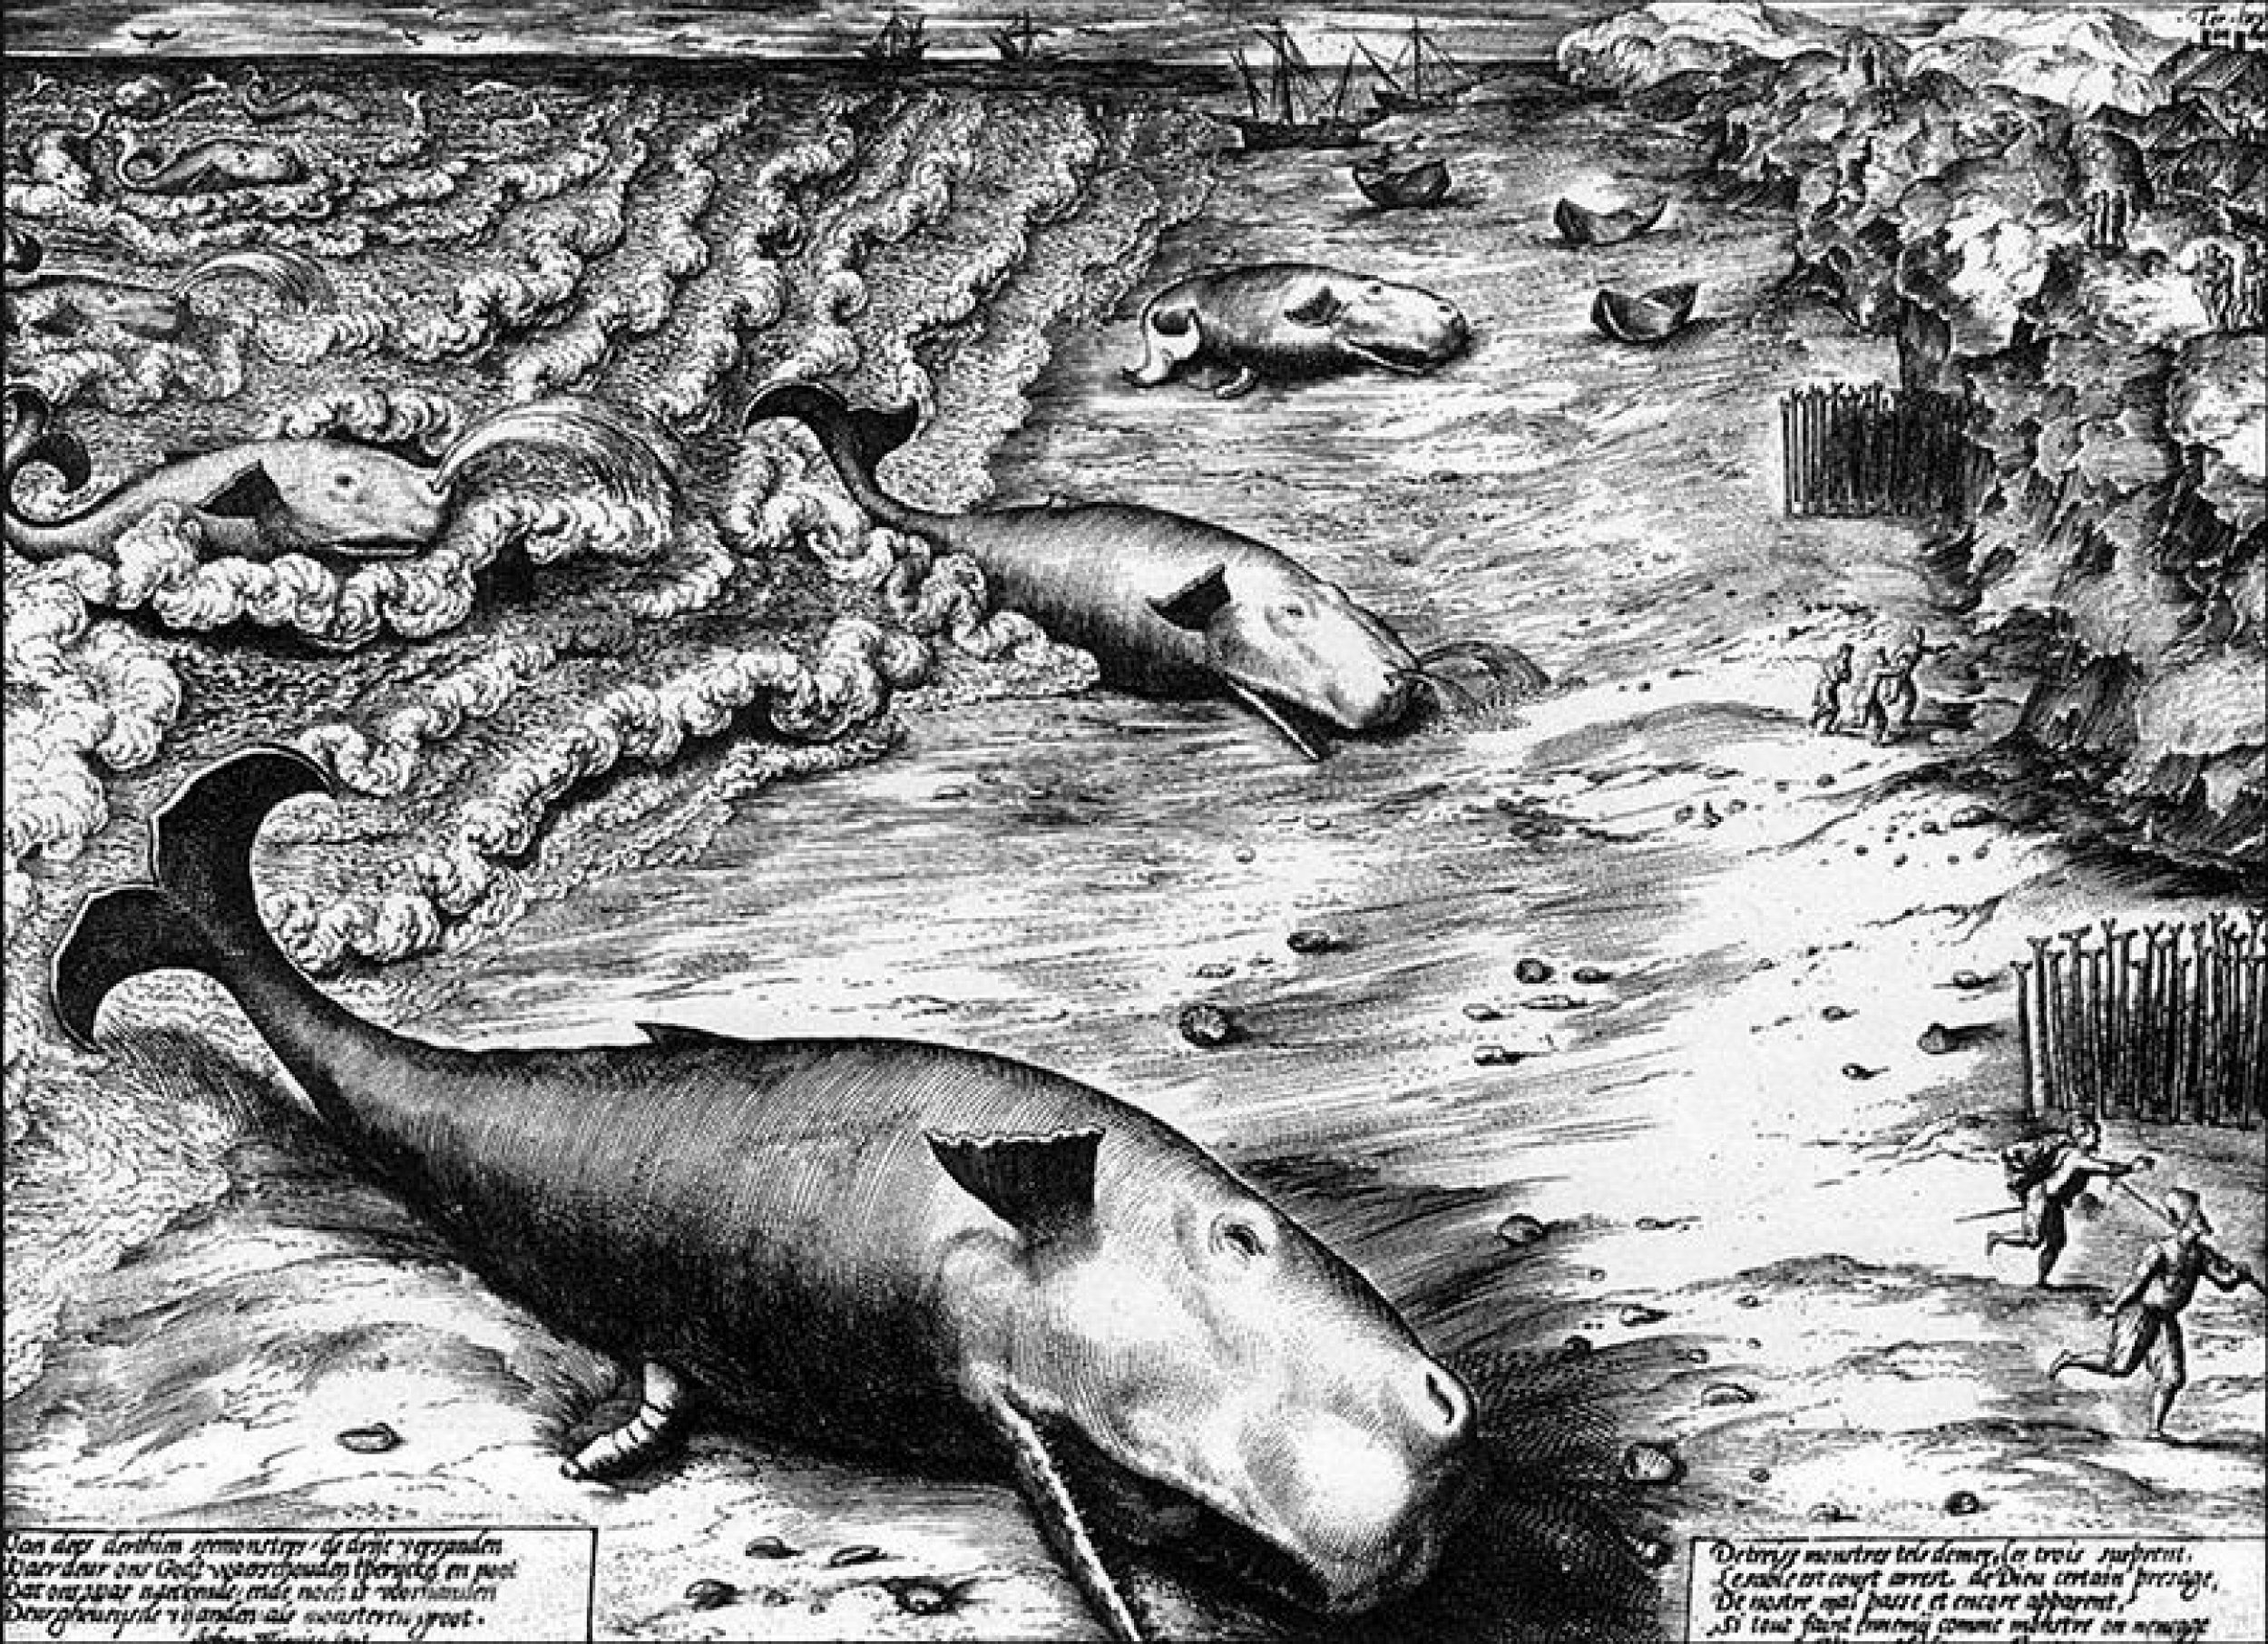 Three Beached Whales, a 1577 engraving by Dutch artist Jan Wierix, depicts stranded Sperm Whales